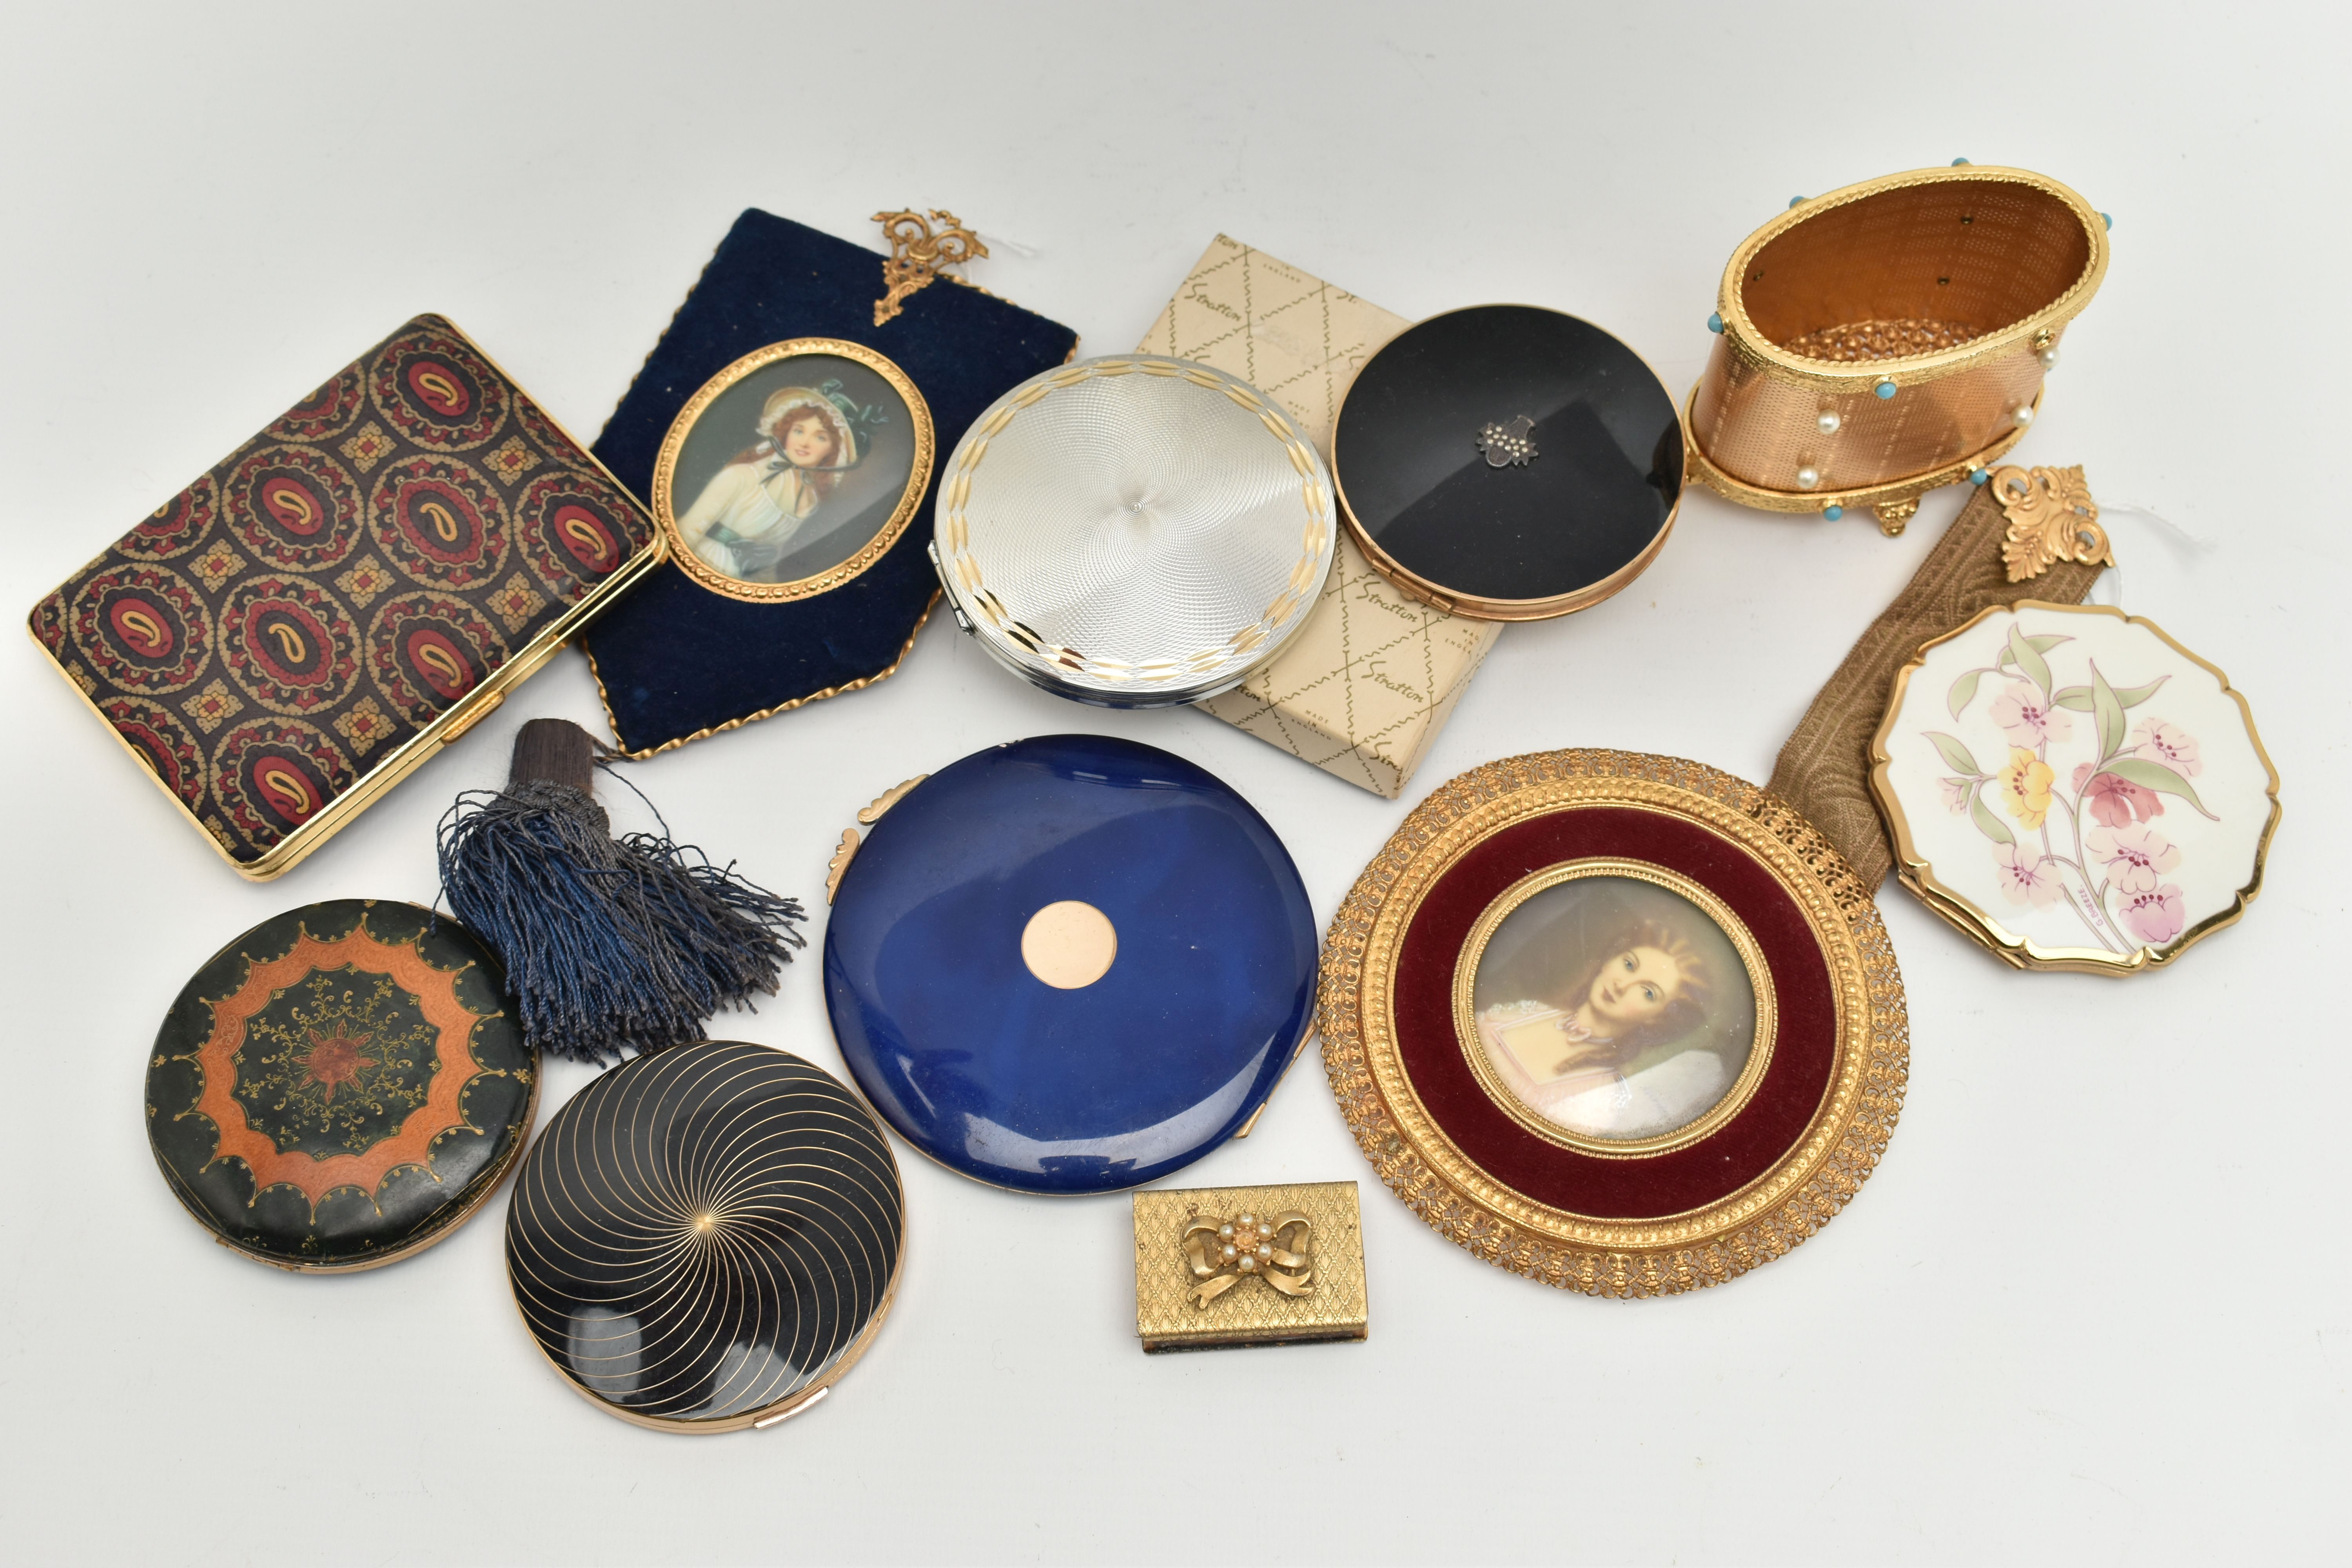 A BOX OF COMPACTS AND TWO MINIATURE PORTRAITS, to include a blue lacquer 'Gucci' compact, three '